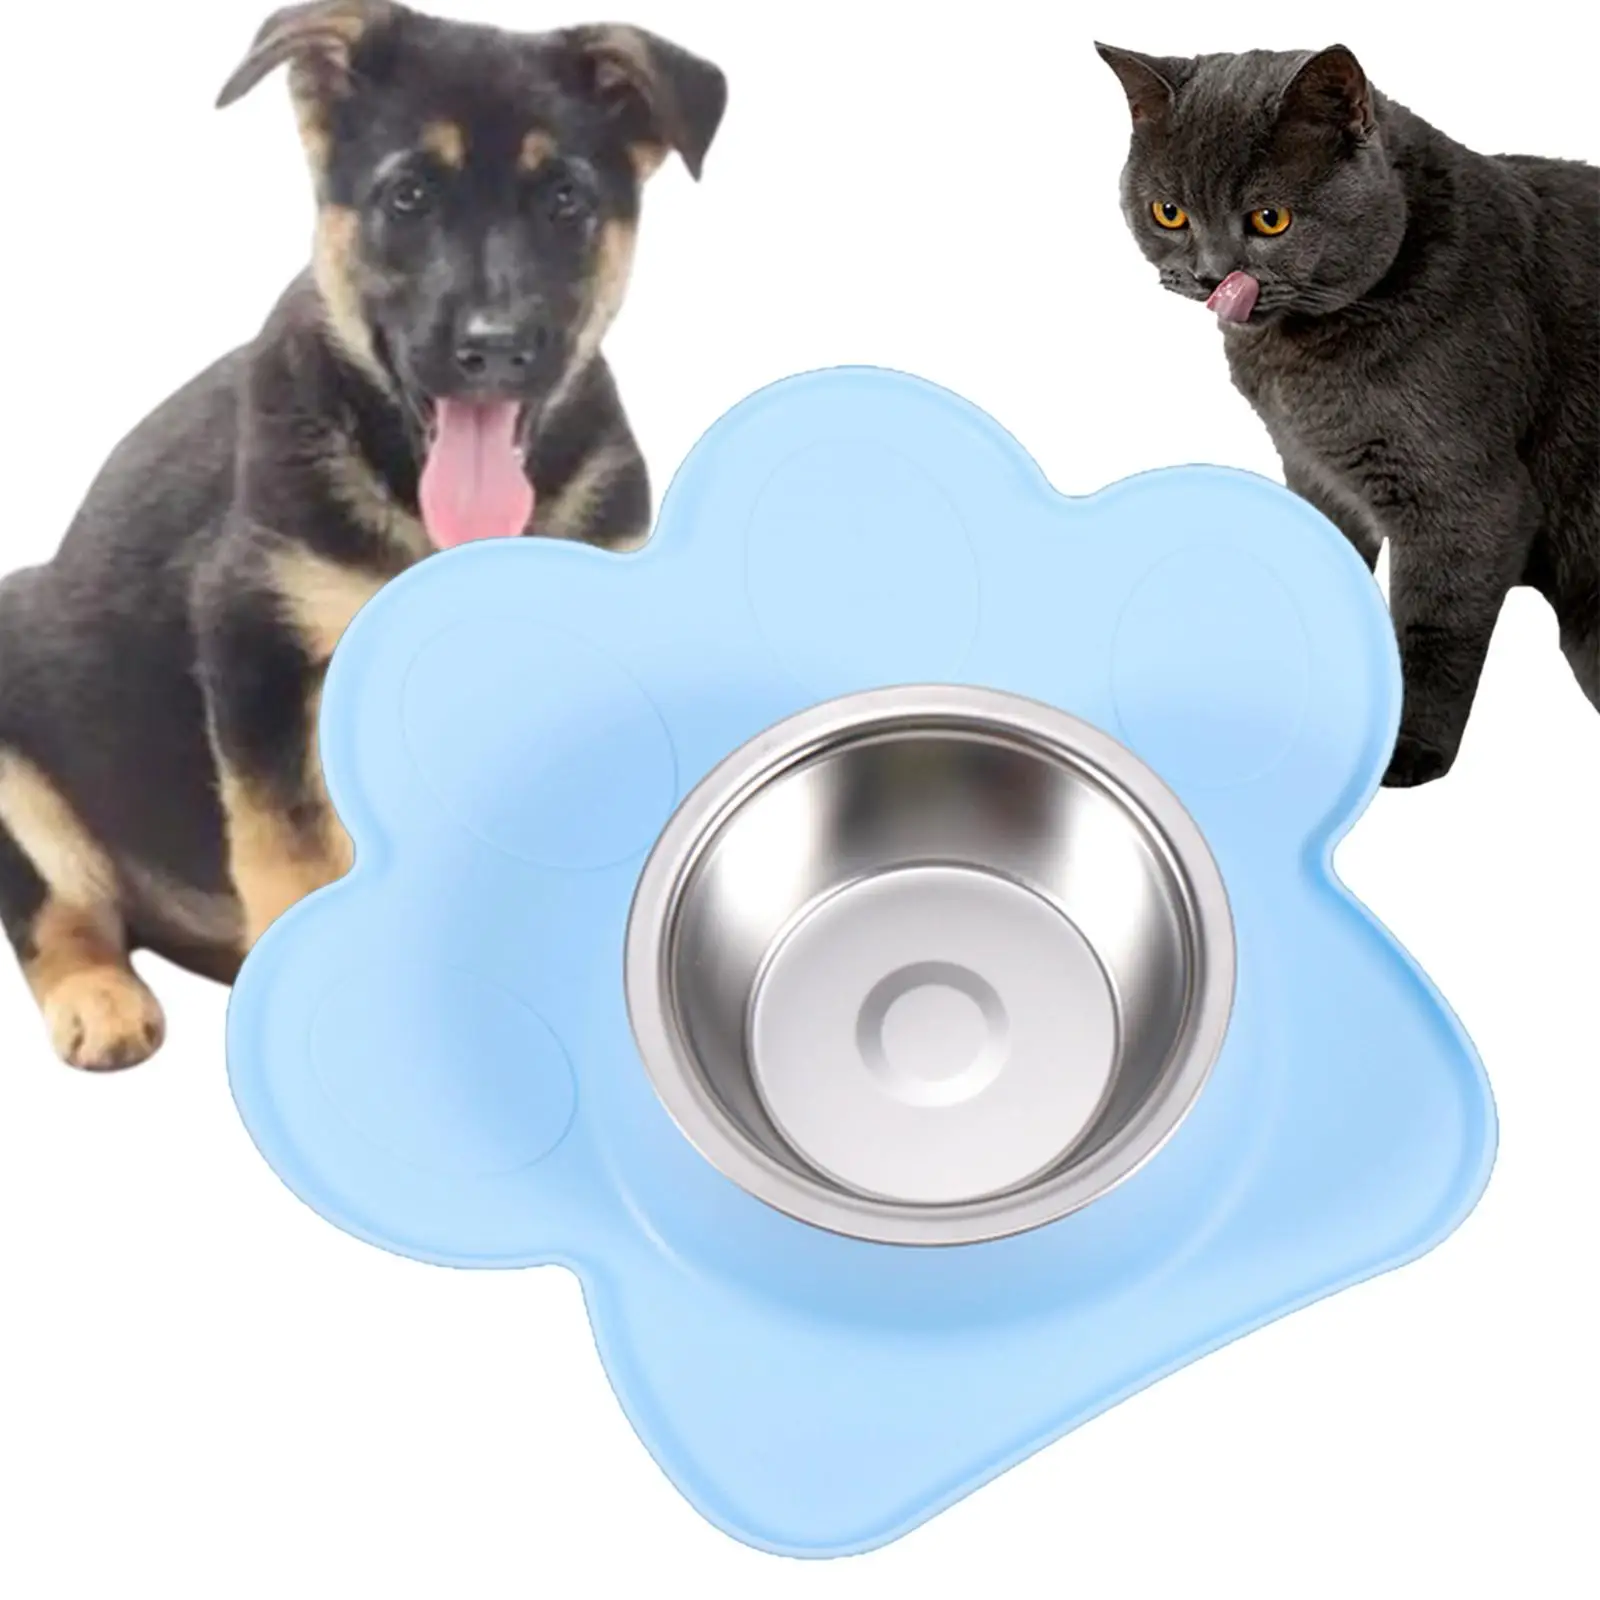 Dog Food Bowl Pet Feeder Food Container Cat Food Dish Kitten Water Bowl Stainless Steel Bowl Durable Pet Bowl Cat Dog Bowl